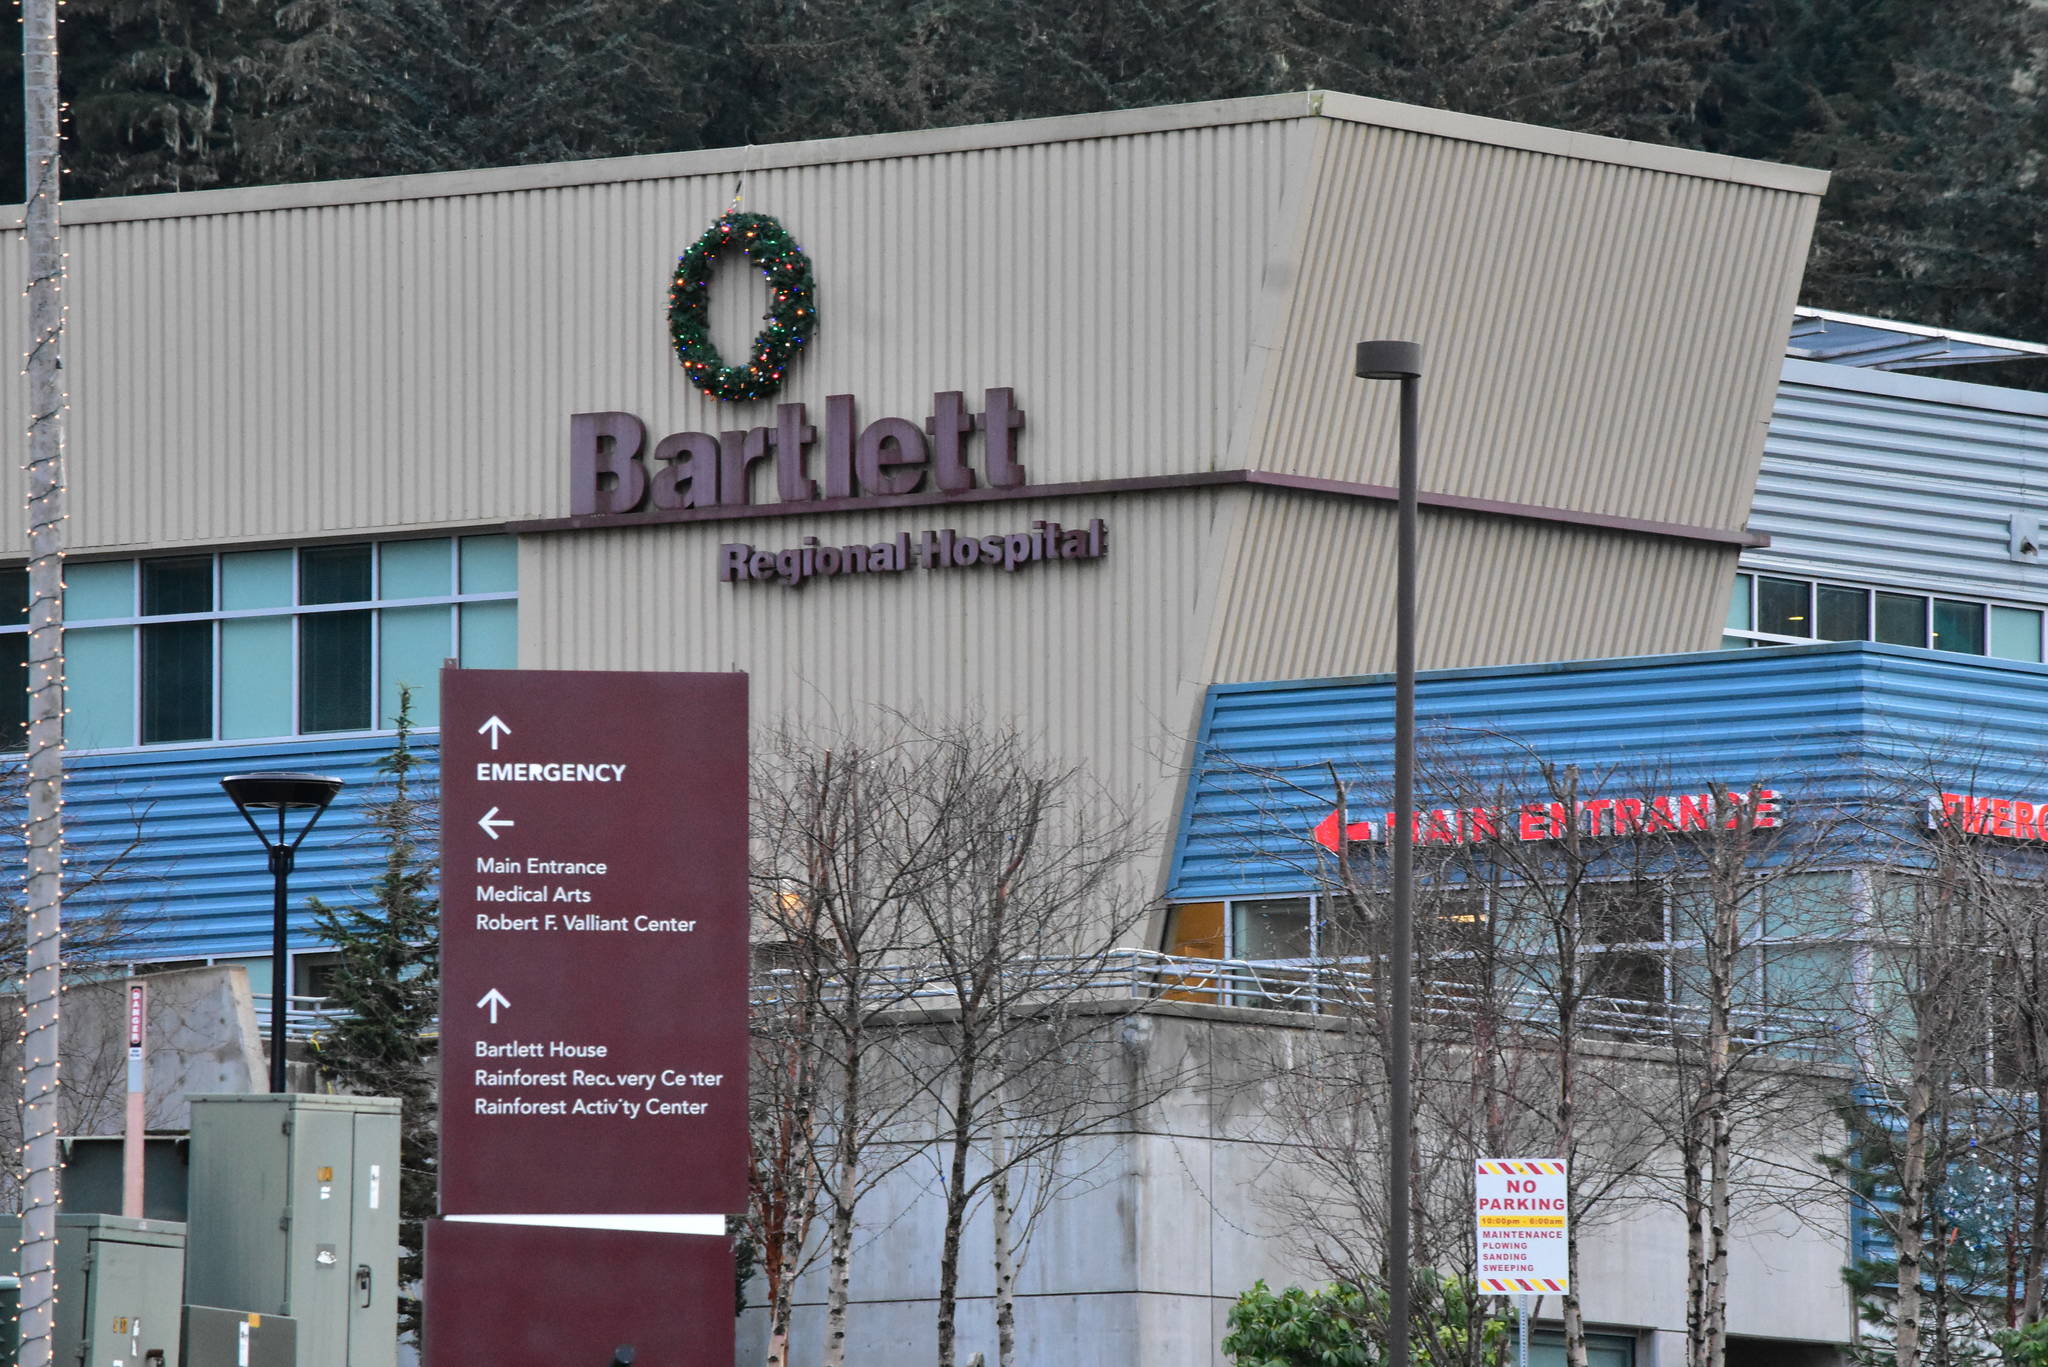 Bartlett Regional Hospital, seen here on Thursday, Dec. 10, 2020, has proposed a four percent price increase for 2022. The price increase is part of the hospital's efforts to reset after a challenging year. (Peter Segall / Juneau Empire File)